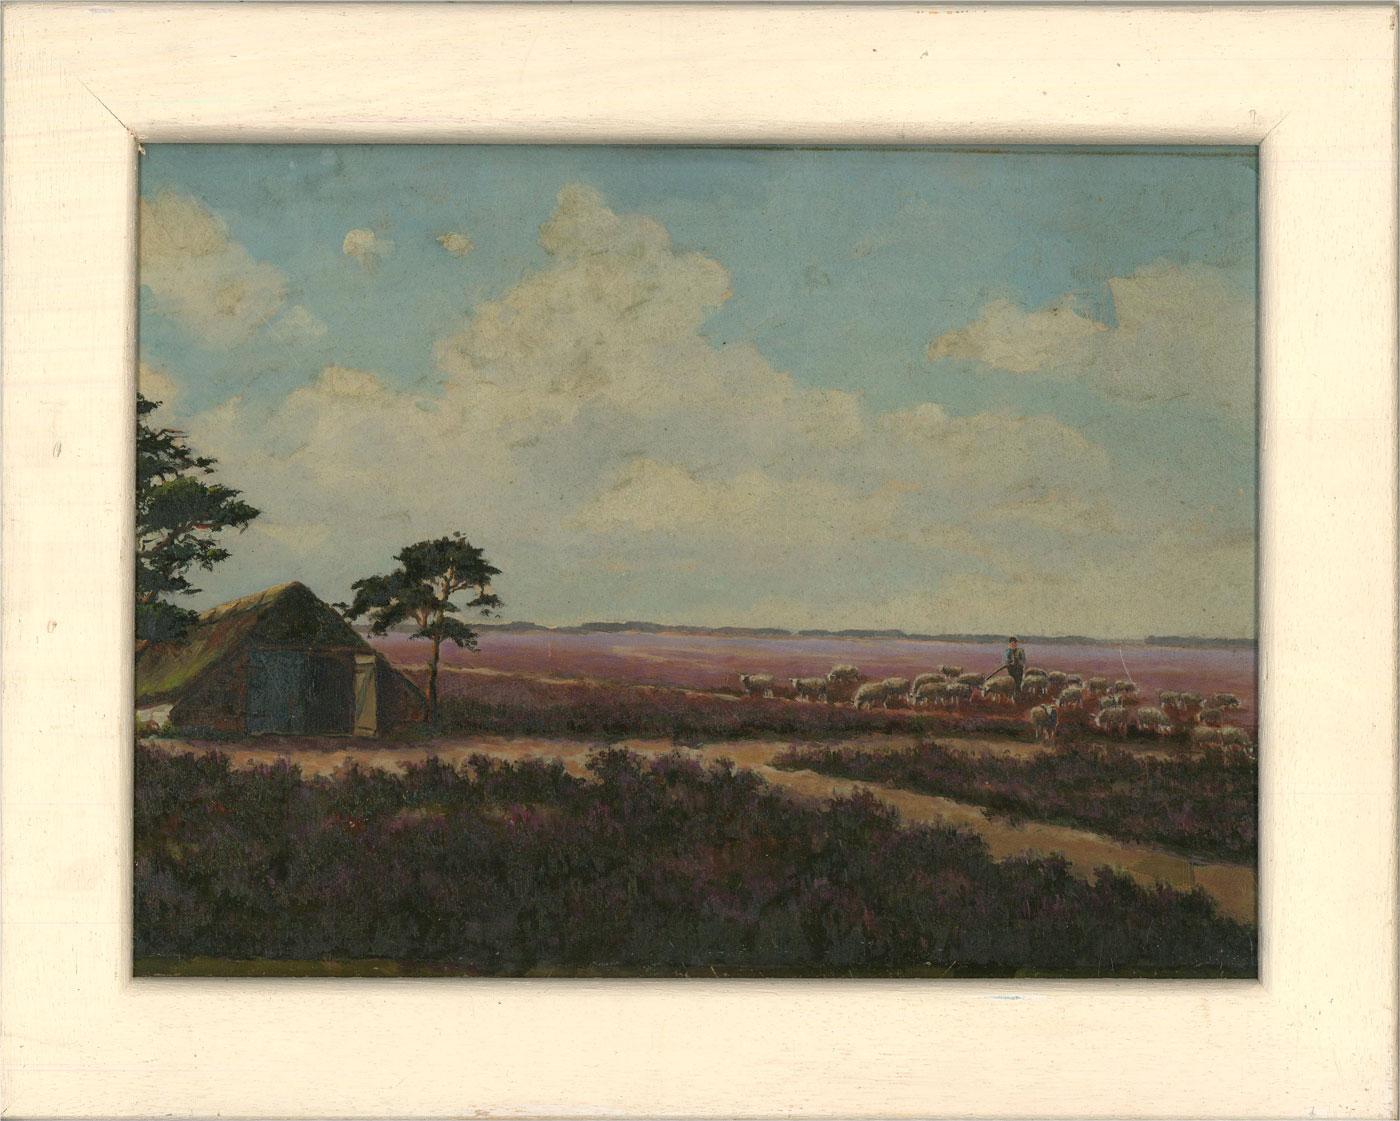 This delightful oil study depicts a farmer herding his flock of sheep towards a barn before a vast landscape. The artist uses soft purple tones to capture beautiful heather covered fields. Unsigned. Presented in a white painted wooden frame. On